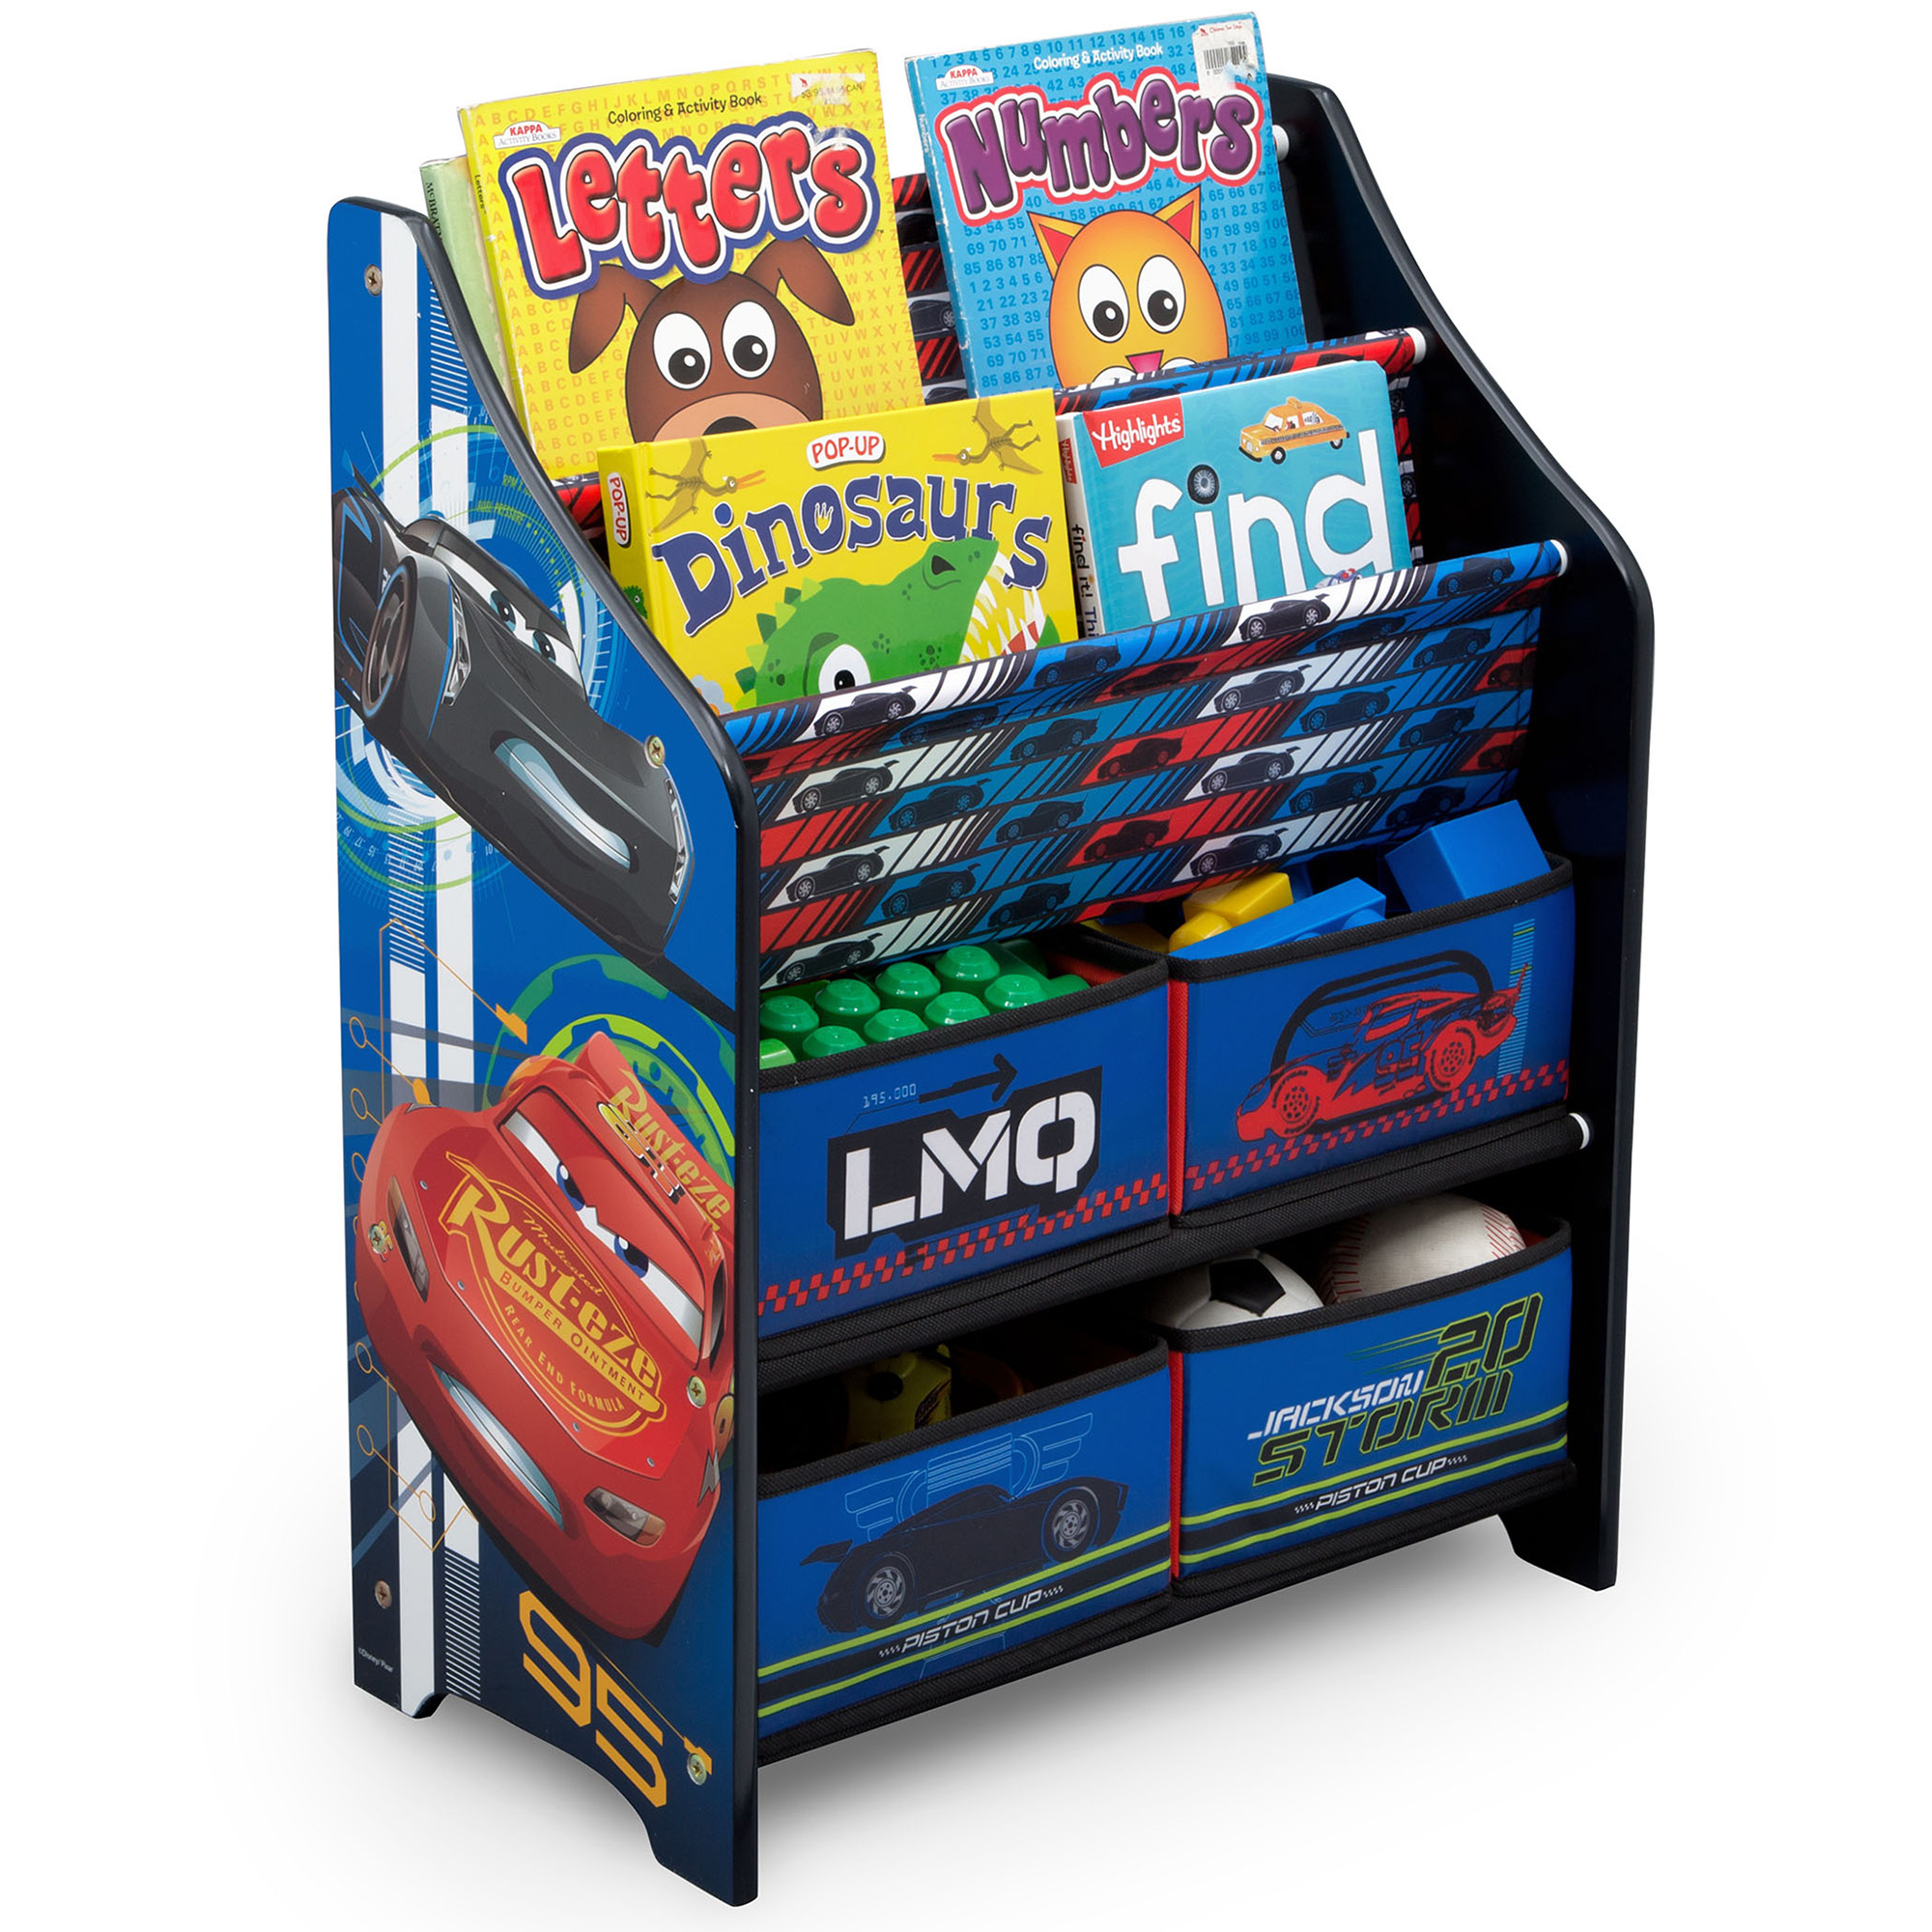 Disney/Pixar Cars Book and Toy Organizer for Kids/Toddlers by Delta Children, Greenguard Gold Certified - image 1 of 5